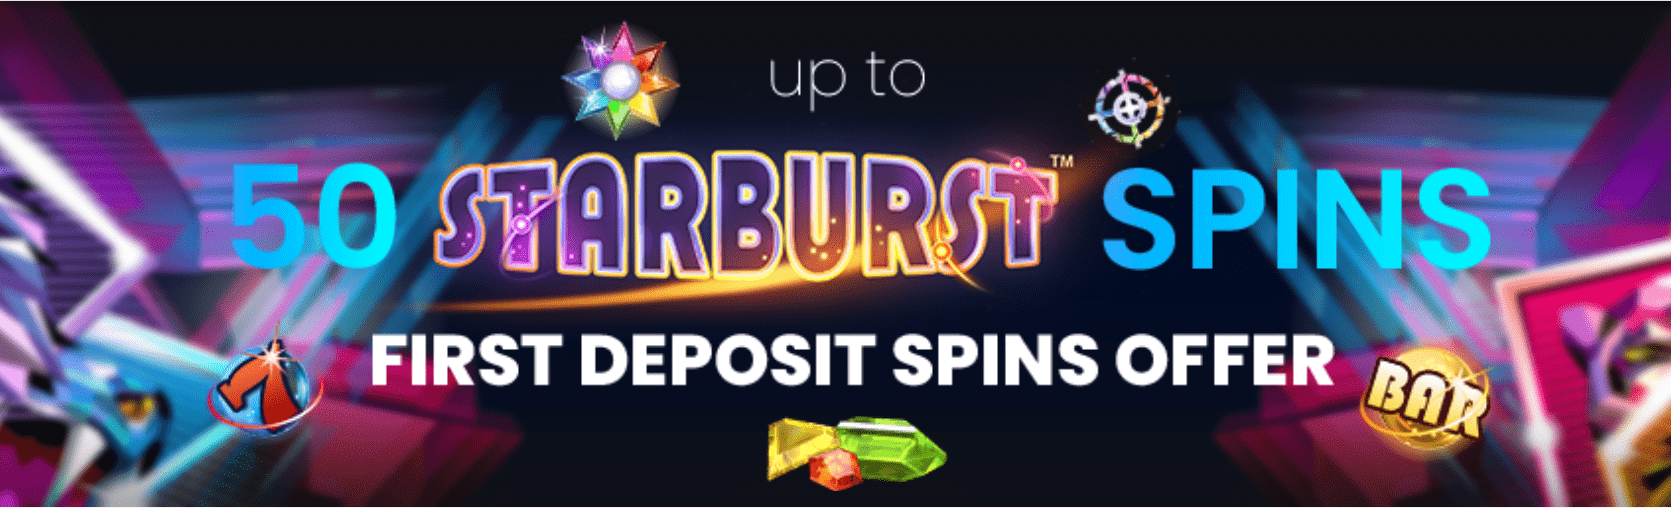 50 free spins welcome offer